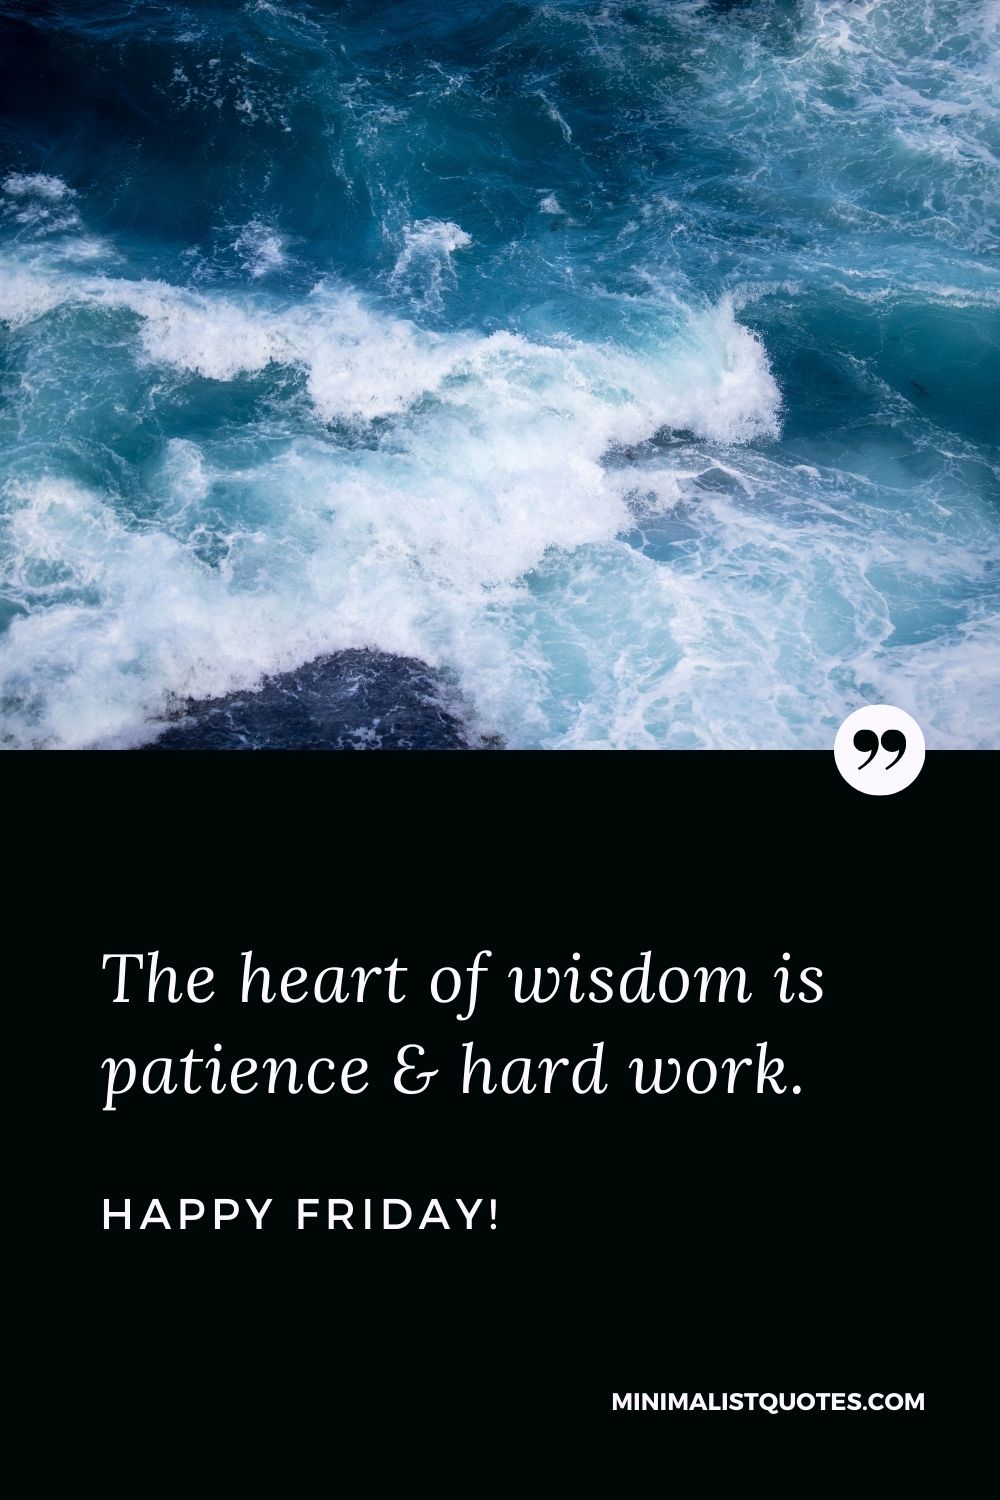 Friday Quote, Wish & Message With Image: The heart of wisdom is patience & hard work. Happy Friday!